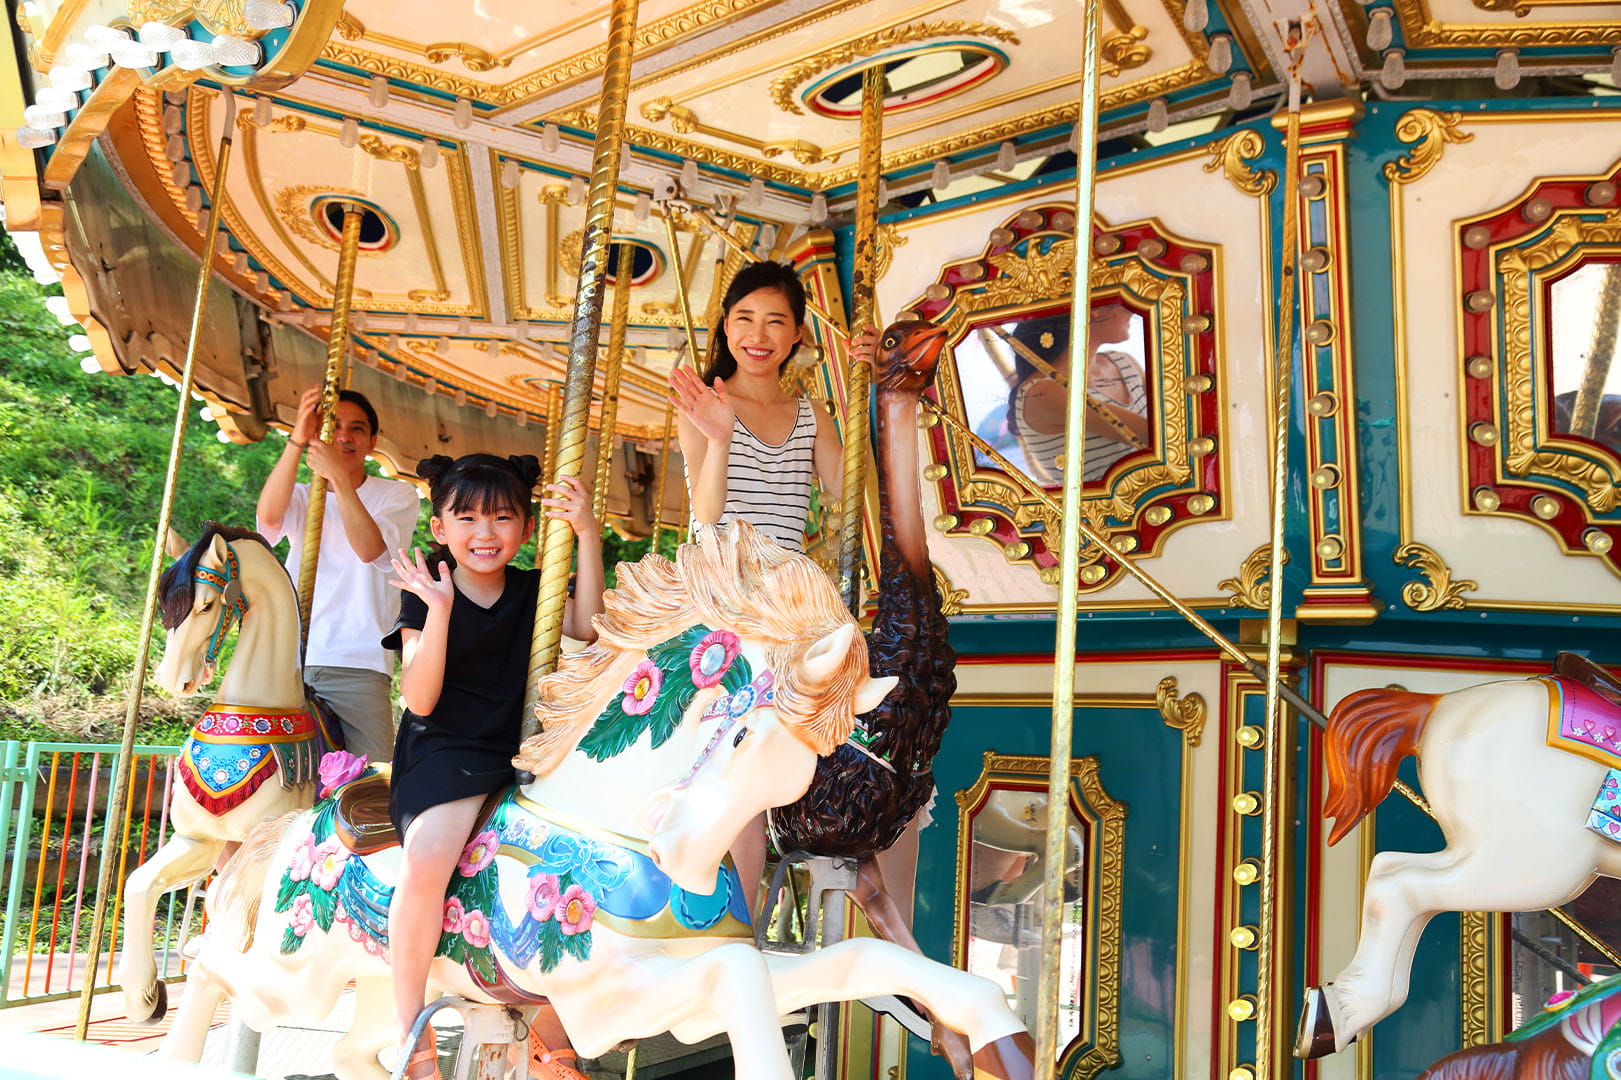 What’s an amusement park without a merry-go-round?!